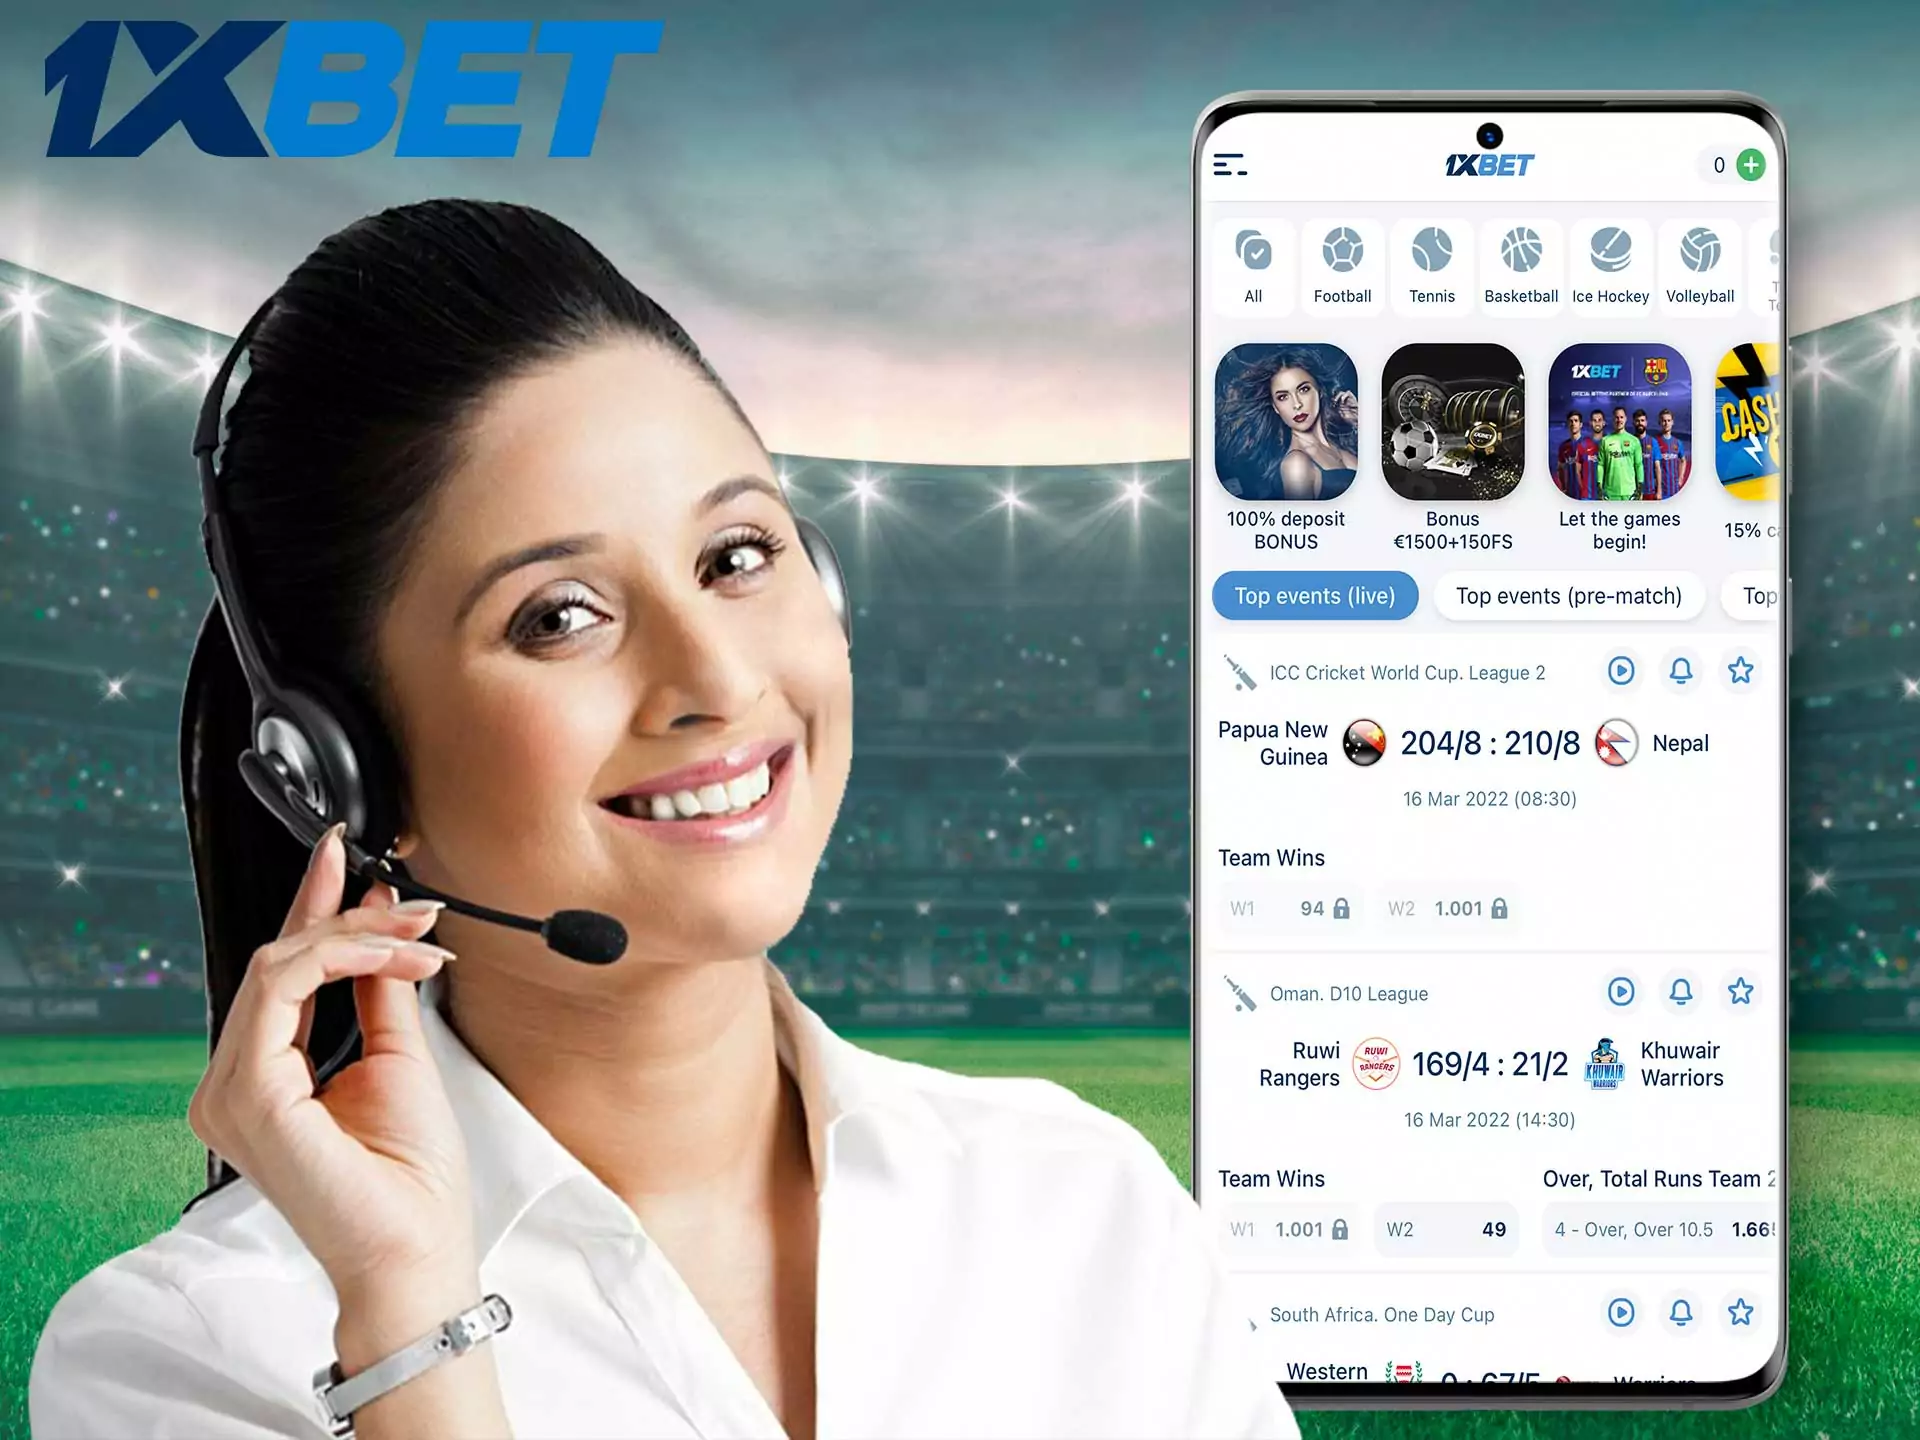 In the 1xbet application, you can get help with questions of interest.